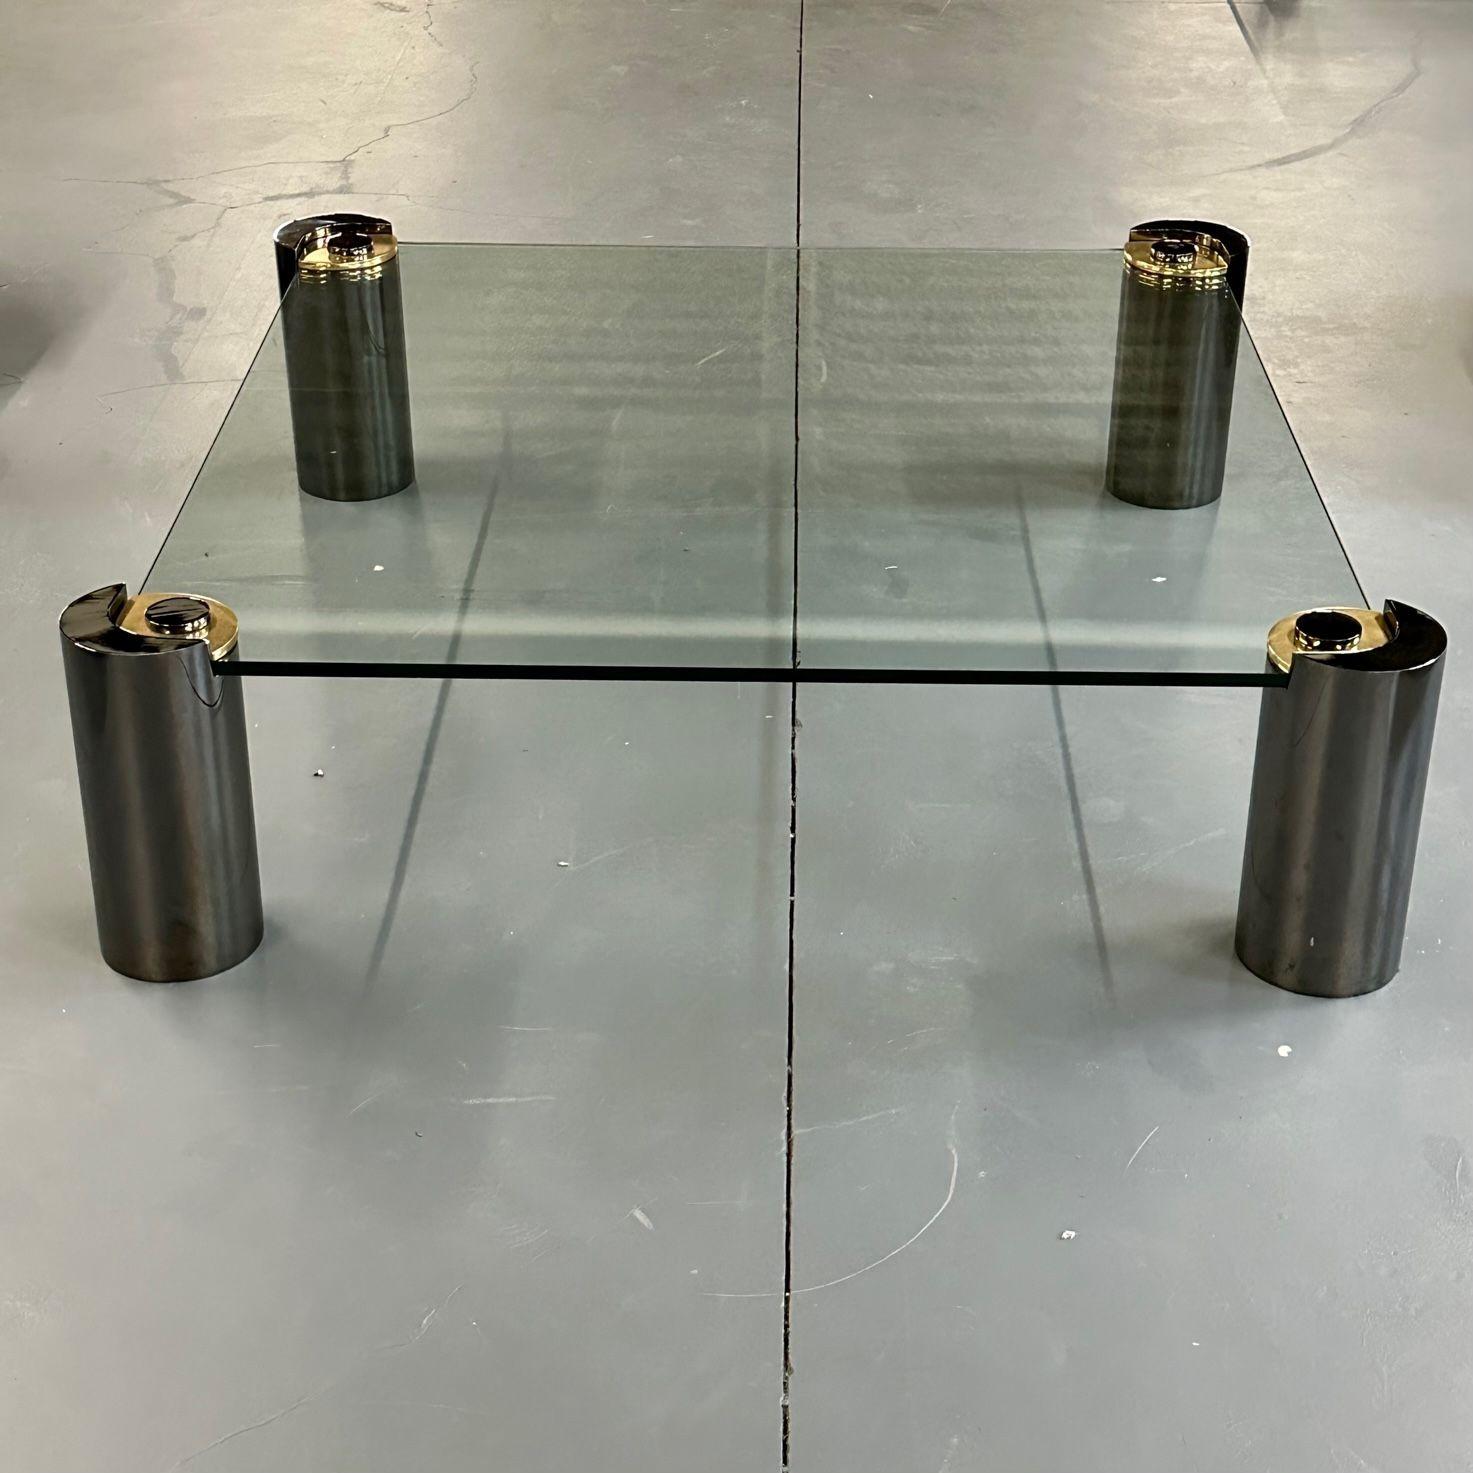 Signed Large Midcentury Karl Springer Coffee / Cocktail Table, Gunmetal, Brass

Priced well below site and market value comes this  Large and Impressive Glass top Coffee or Cocktail Table by Karl Springer. This high design table has a large thick